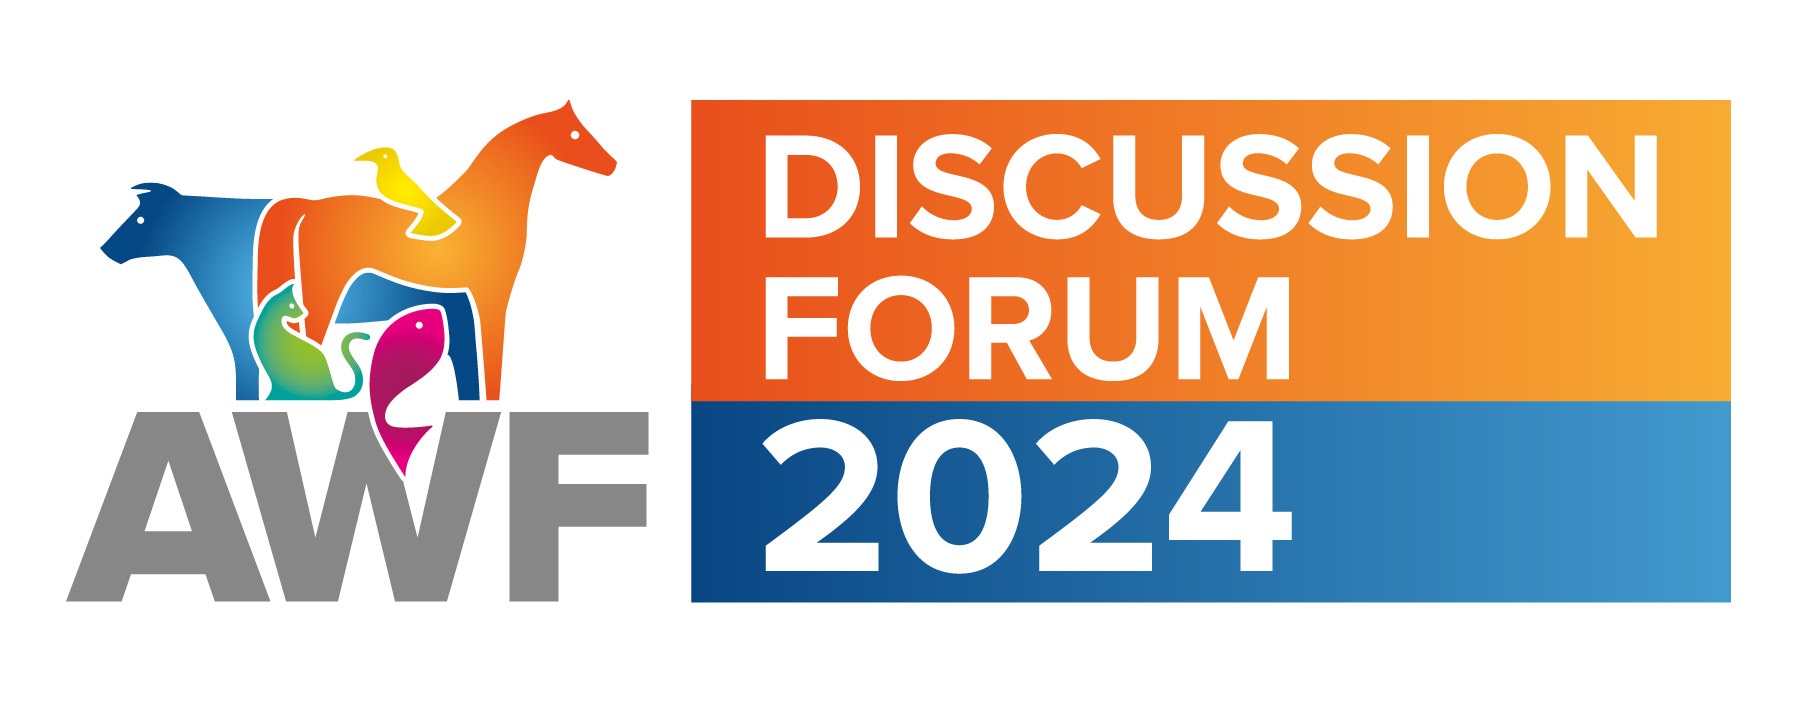 ‘Animal welfare, ethics and rights’ theme of the Animal Welfare Foundation’s 2024 Discussion Forum Image